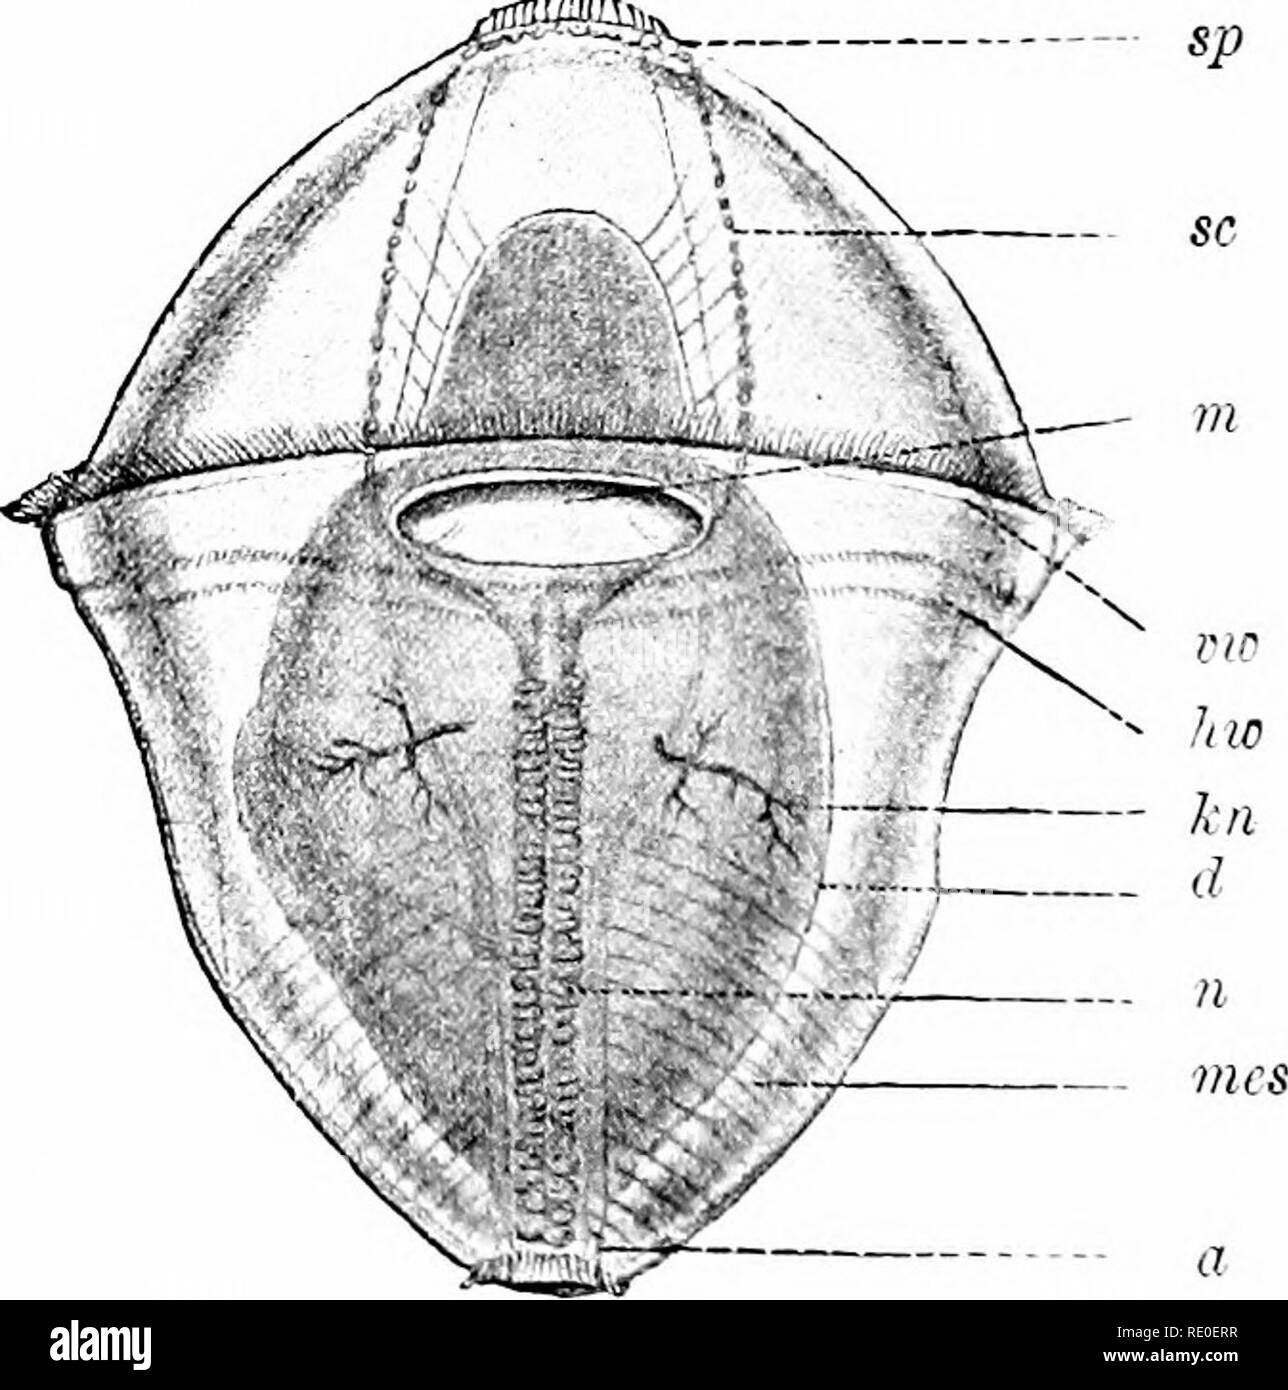 . A manual of zoology. Zoology. Fie. 2W. Fio. 288. Fig. 287.—Anatomy of Phascalosoma gouldi (orig.). a, nnus; a, anterior retractors; d, digestive tract; f/, gonads; m, mouth; ?i, nephridia; 7ic, ventral nerve cord; ^»r, postcriftr retractors. Fio. 288.—Larva (trocophore) of Echi}inis. (After Hatschek.) a, anus; d, intestine: hn postoral cilia; fc)i, protonepliridia; »i, moutli; J'ie.s, mesoderm bands with indi- cation of segments; ?(, ventral nerve curd; 6-e, tesophageal commissure; sp, apical plate; inv^ preoral ciliated band.. Please note that these images are extracted from scanned page i Stock Photo